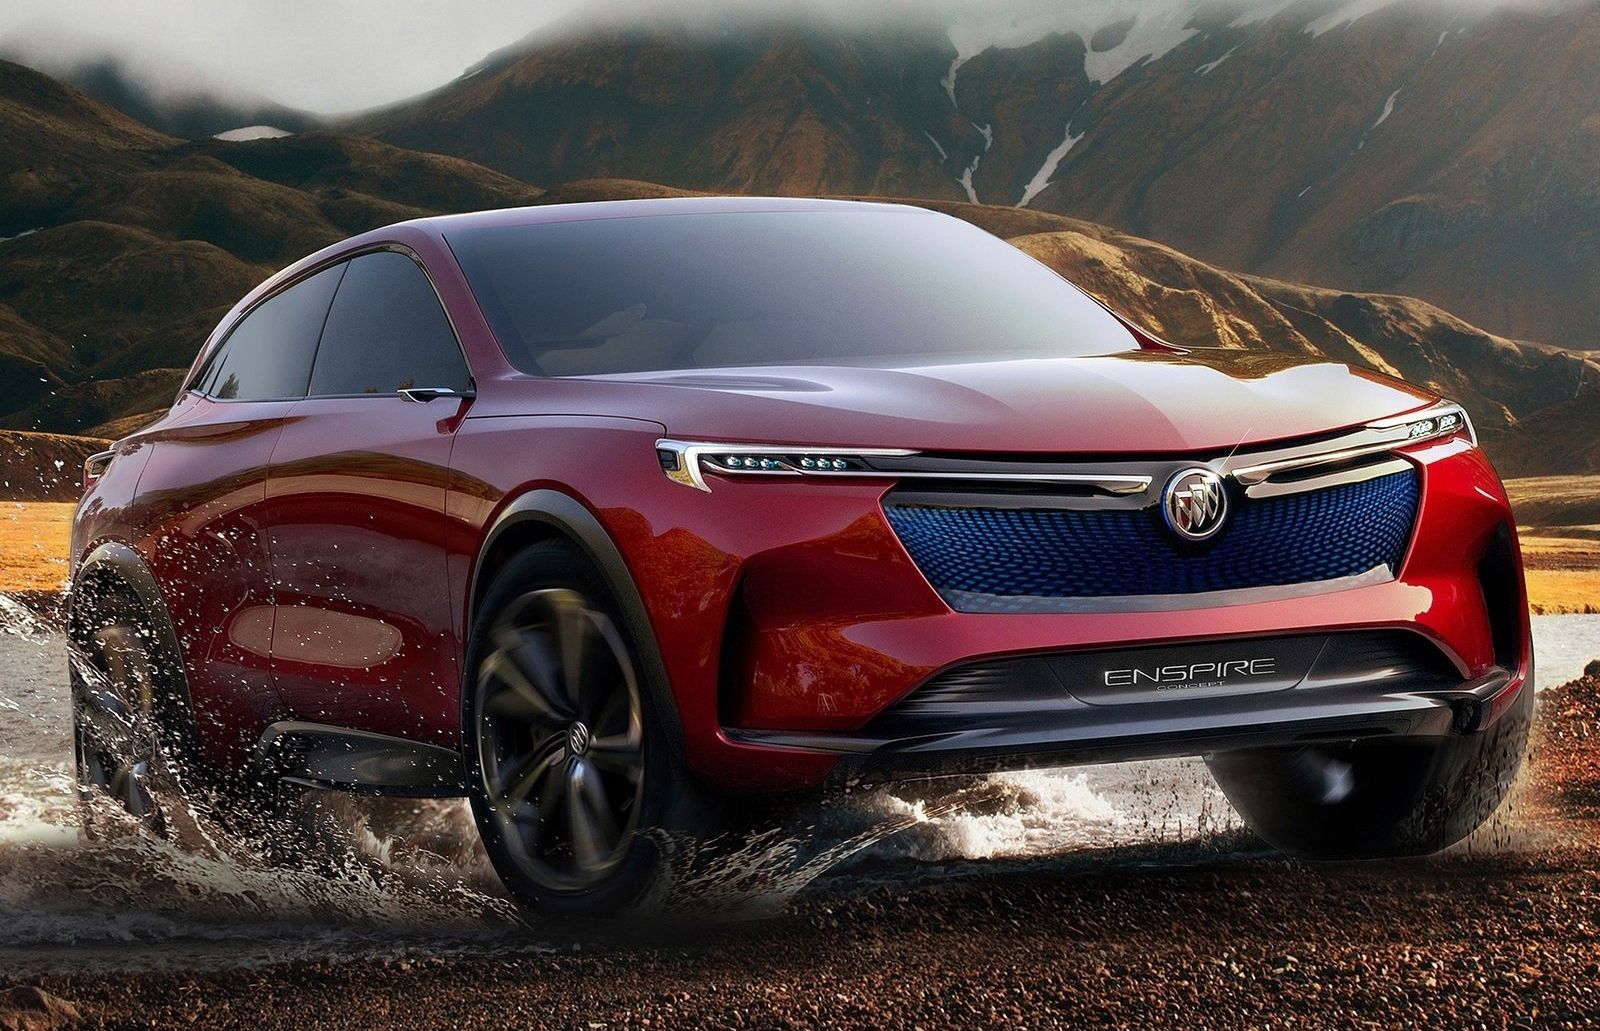 Buick Enspire Concept, an electric SUV | Electric Hunter